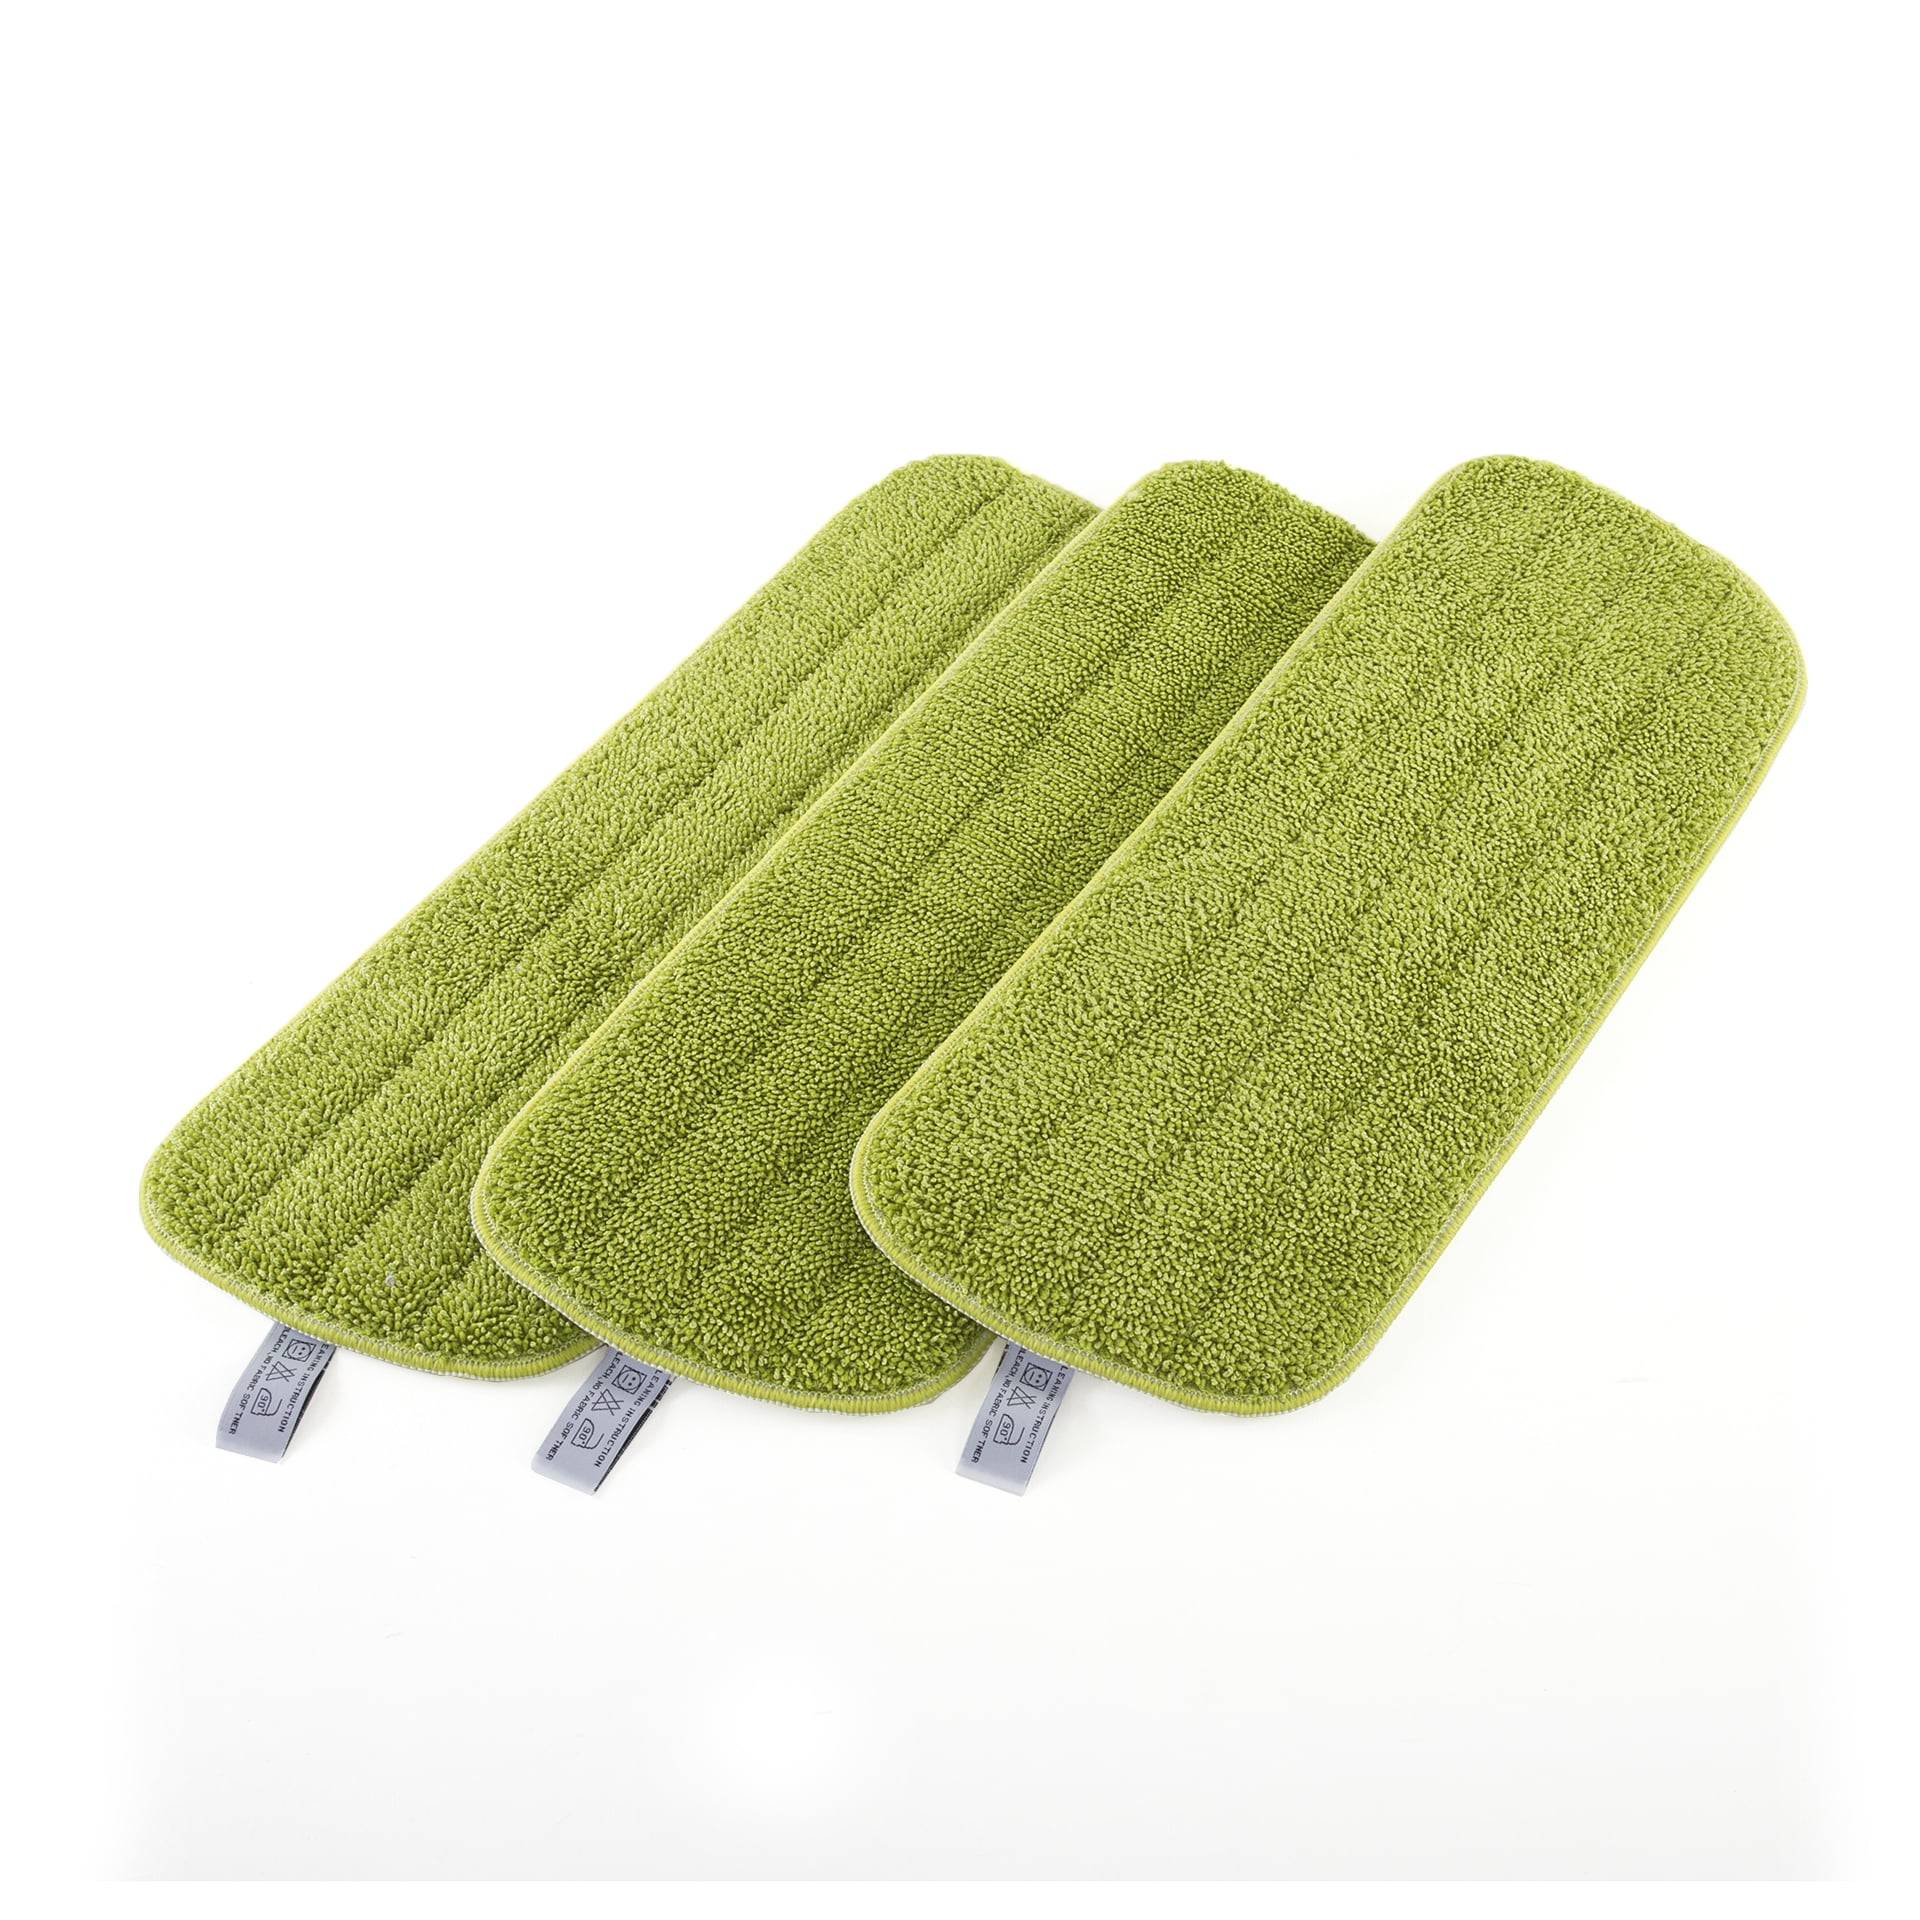 Microfiber Flat Mop Pads - 16 Washable, Reusable, Wet and Dry Mop